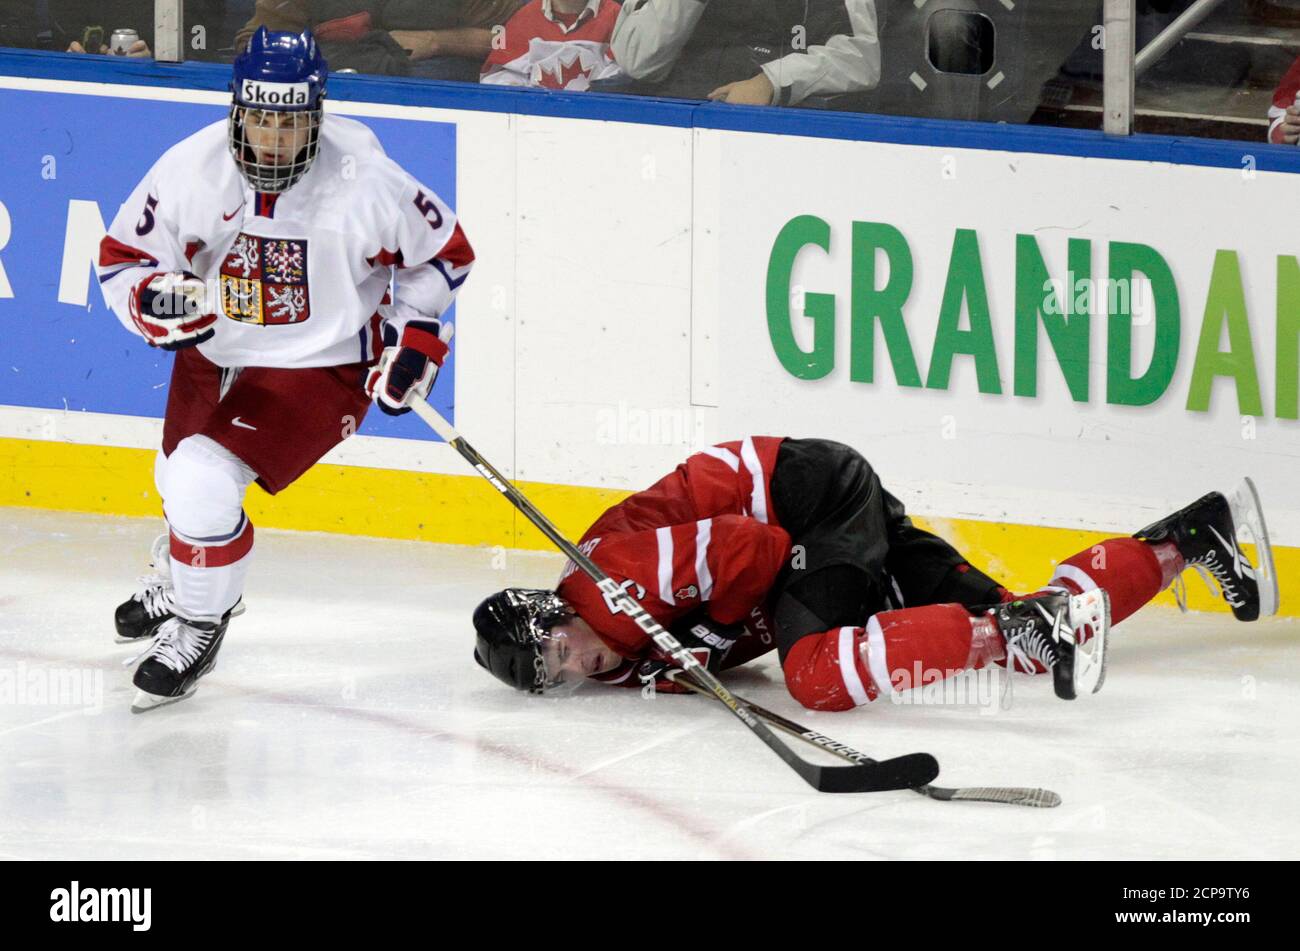 Canada's Erik Gudbranson (R) lies on the ice after being speared by Czech Republic's Martin Frk during the third period of their game at the IIHF World Junior Championships in Buffalo, New York December 28, 2010.     REUTERS/Brendan McDermid (UNITED STATES - Tags: SPORT ICE HOCKEY IMAGES OF THE DAY) Stock Photo